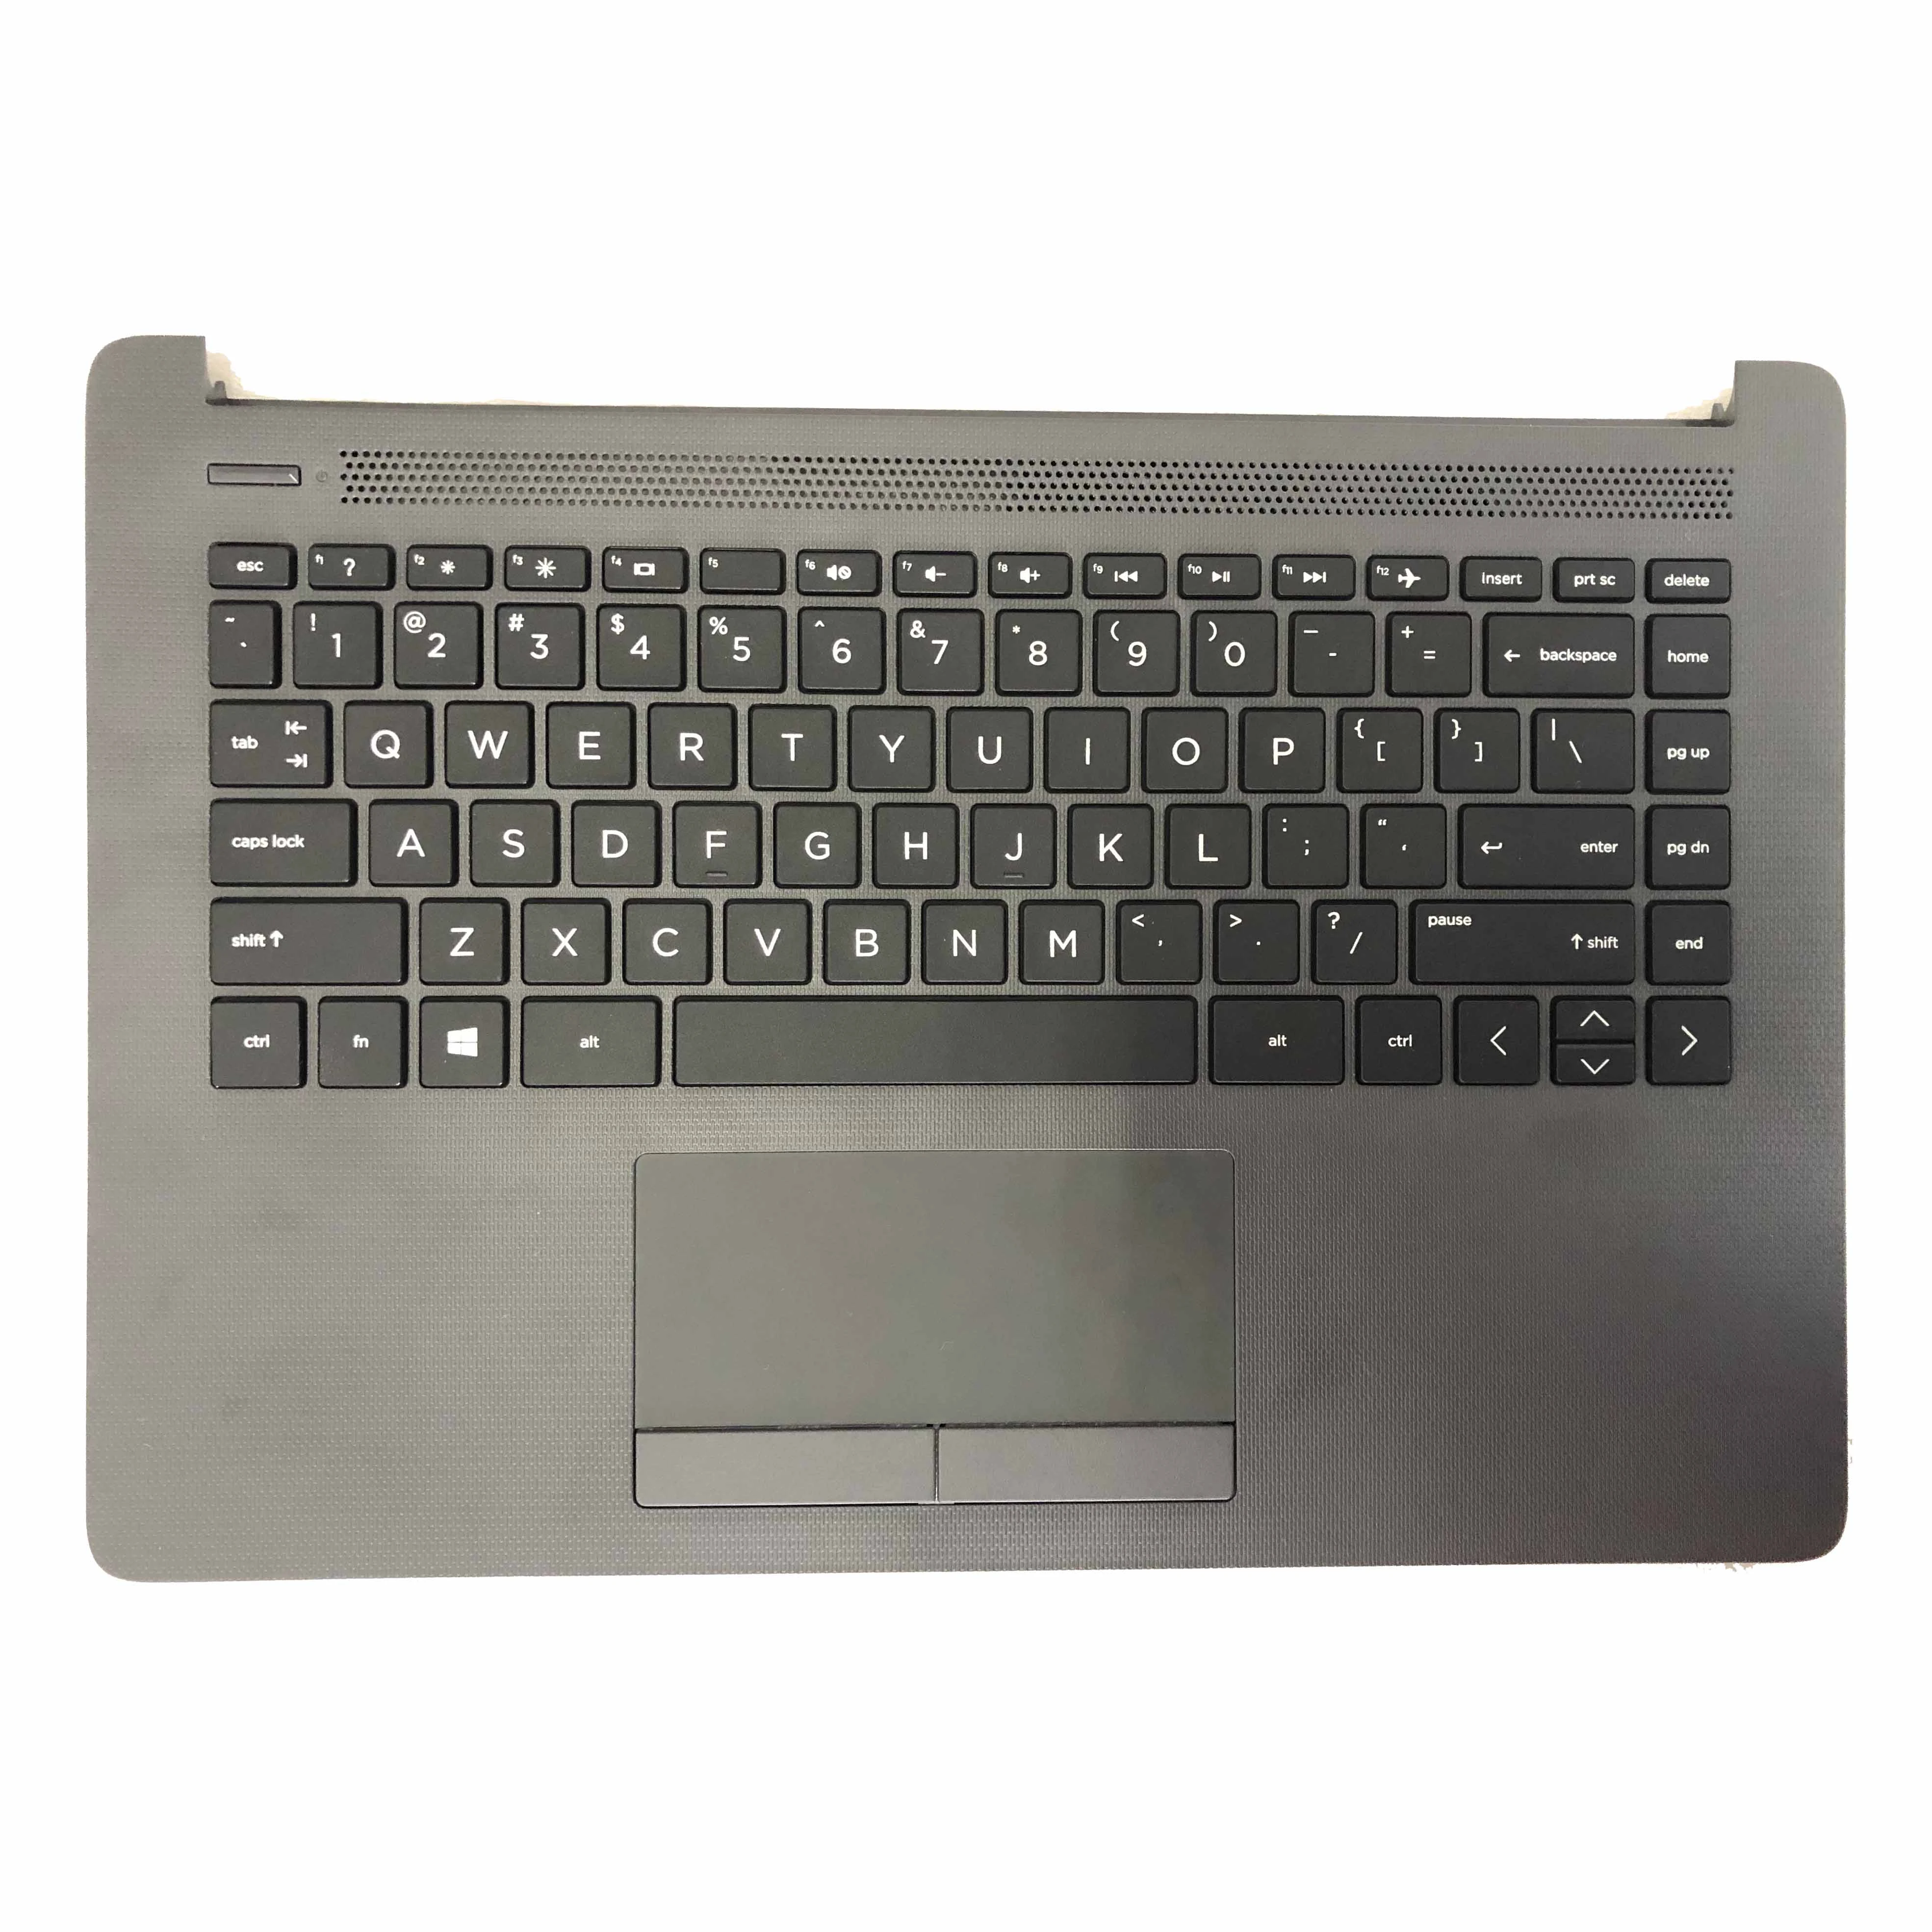 New Original For Hp 240 245 G7 14-cm Palmrest Top Cover With Keyboard  Touchpad Upper Case L44060-001 Us Layout Dark Gray - Laptop Bags & Cases -  AliExpress